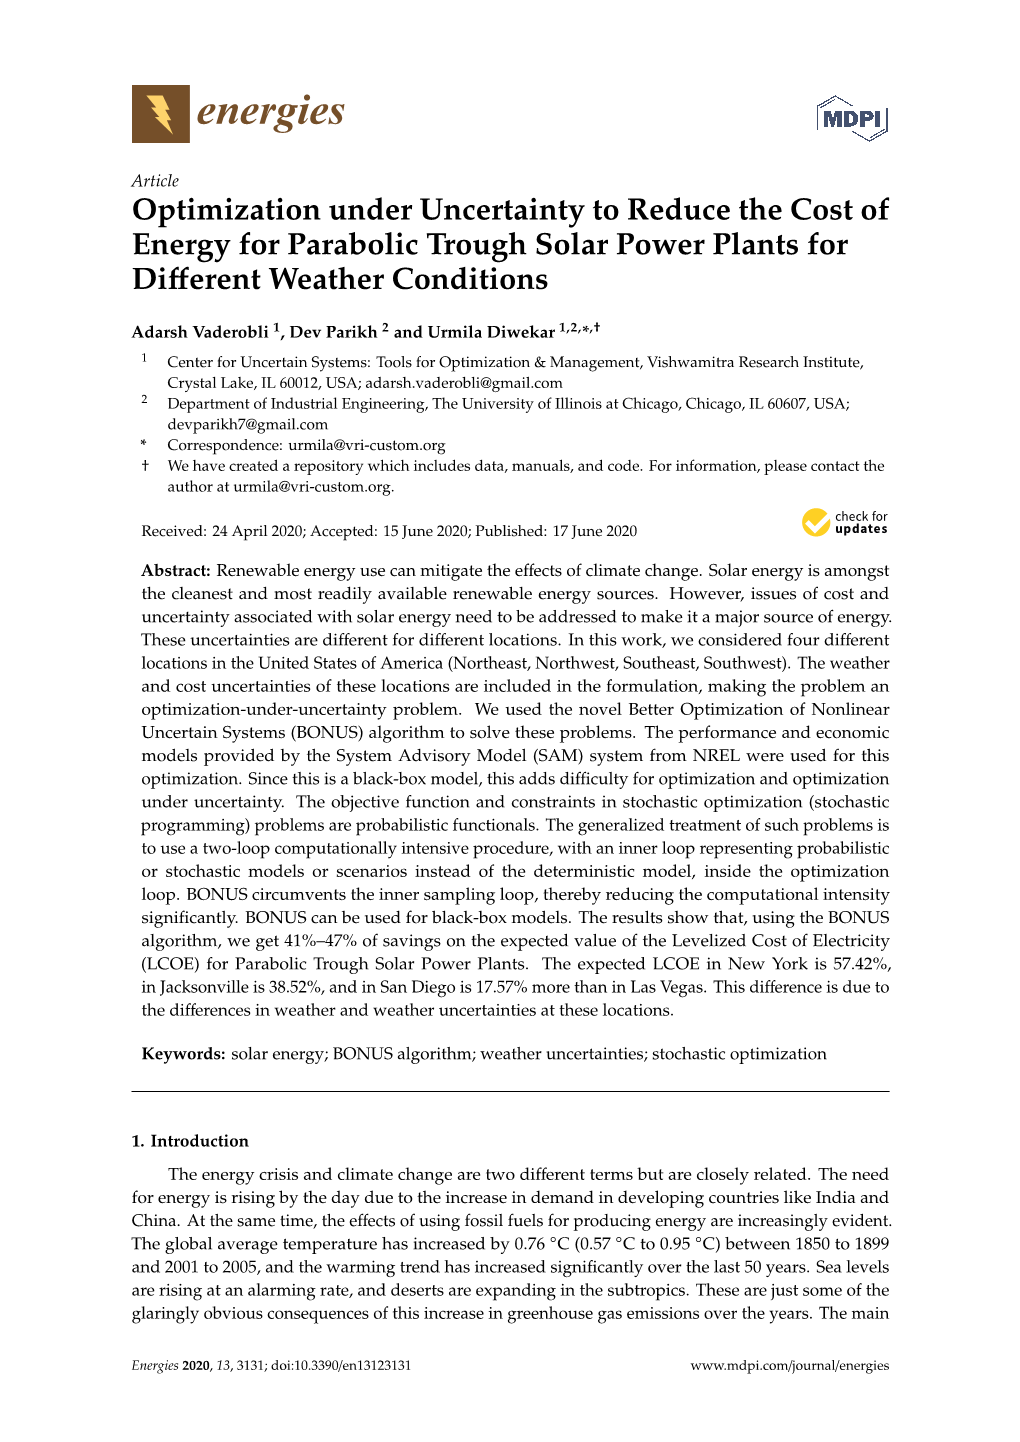 Optimization Under Uncertainty to Reduce the Cost of Energy for Parabolic Trough Solar Power Plants for Diﬀerent Weather Conditions